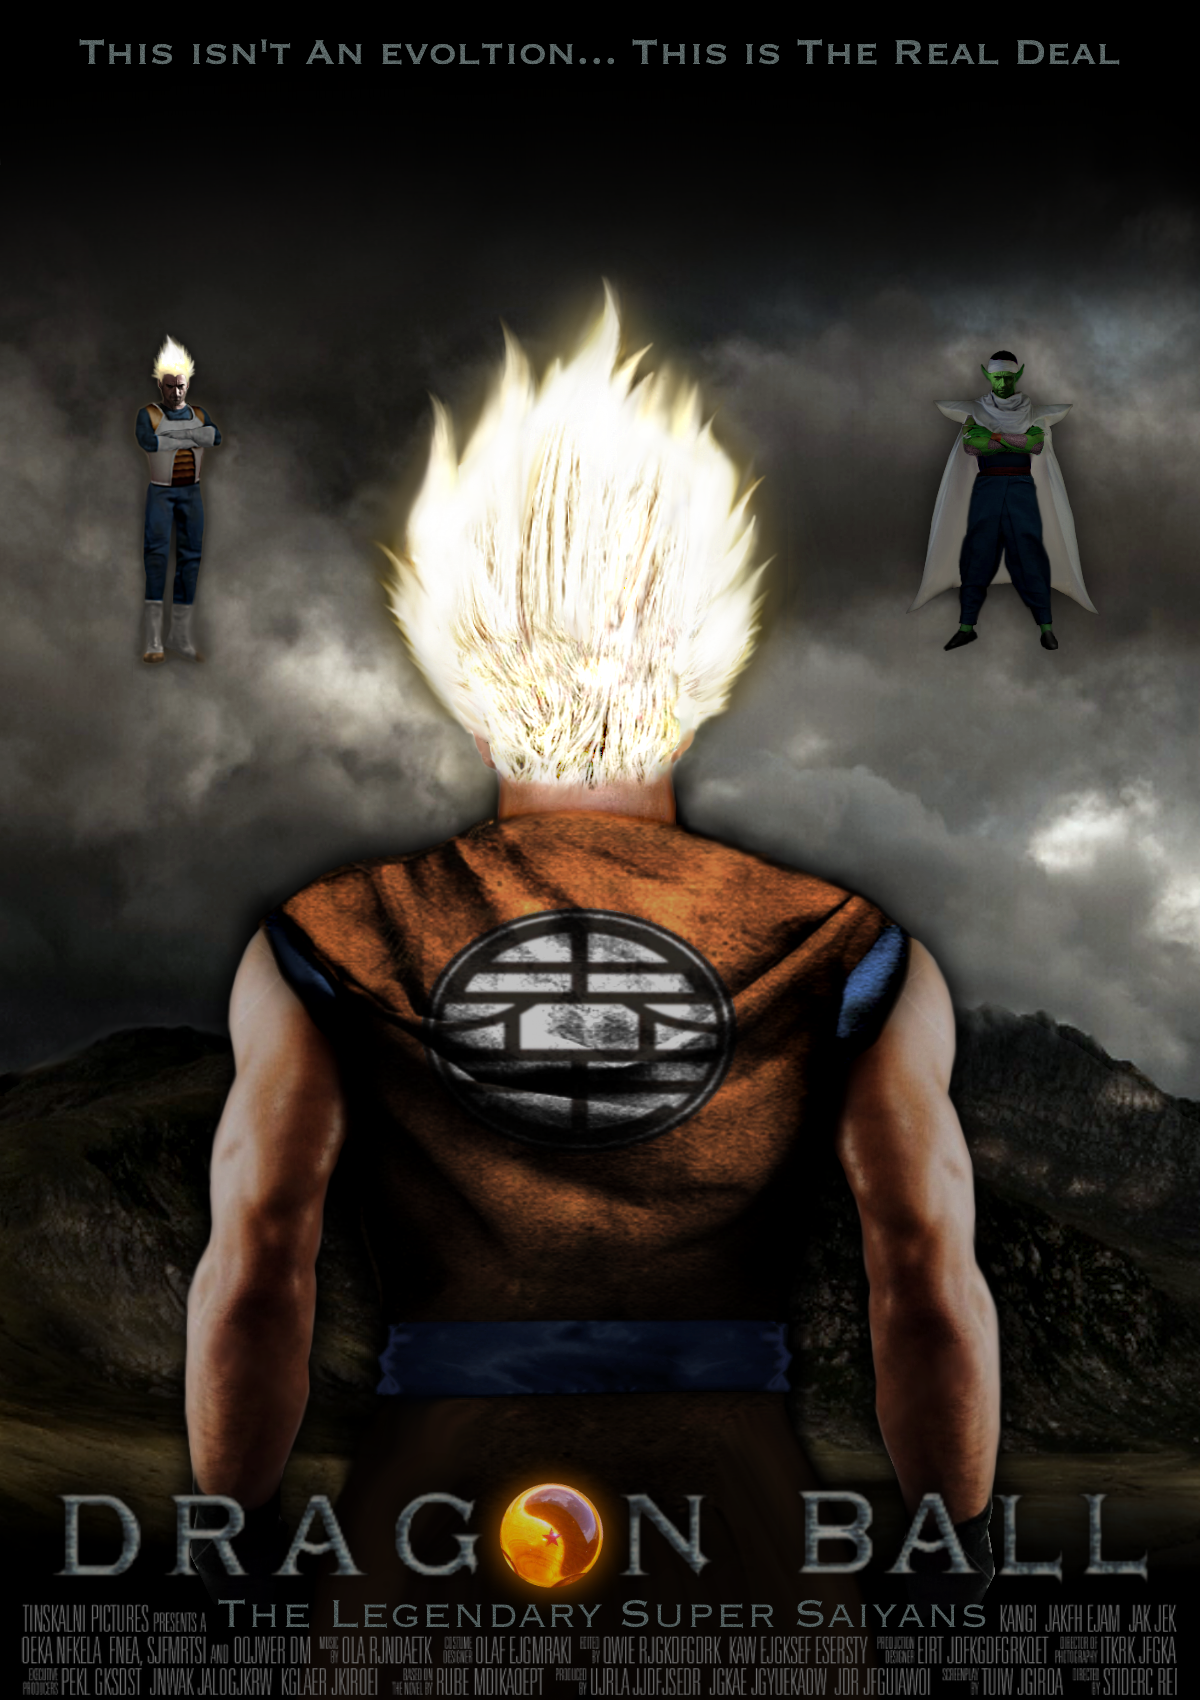 Dragon Ball Live Action Movie Poster By Tony Antwonio Dalw8y9 